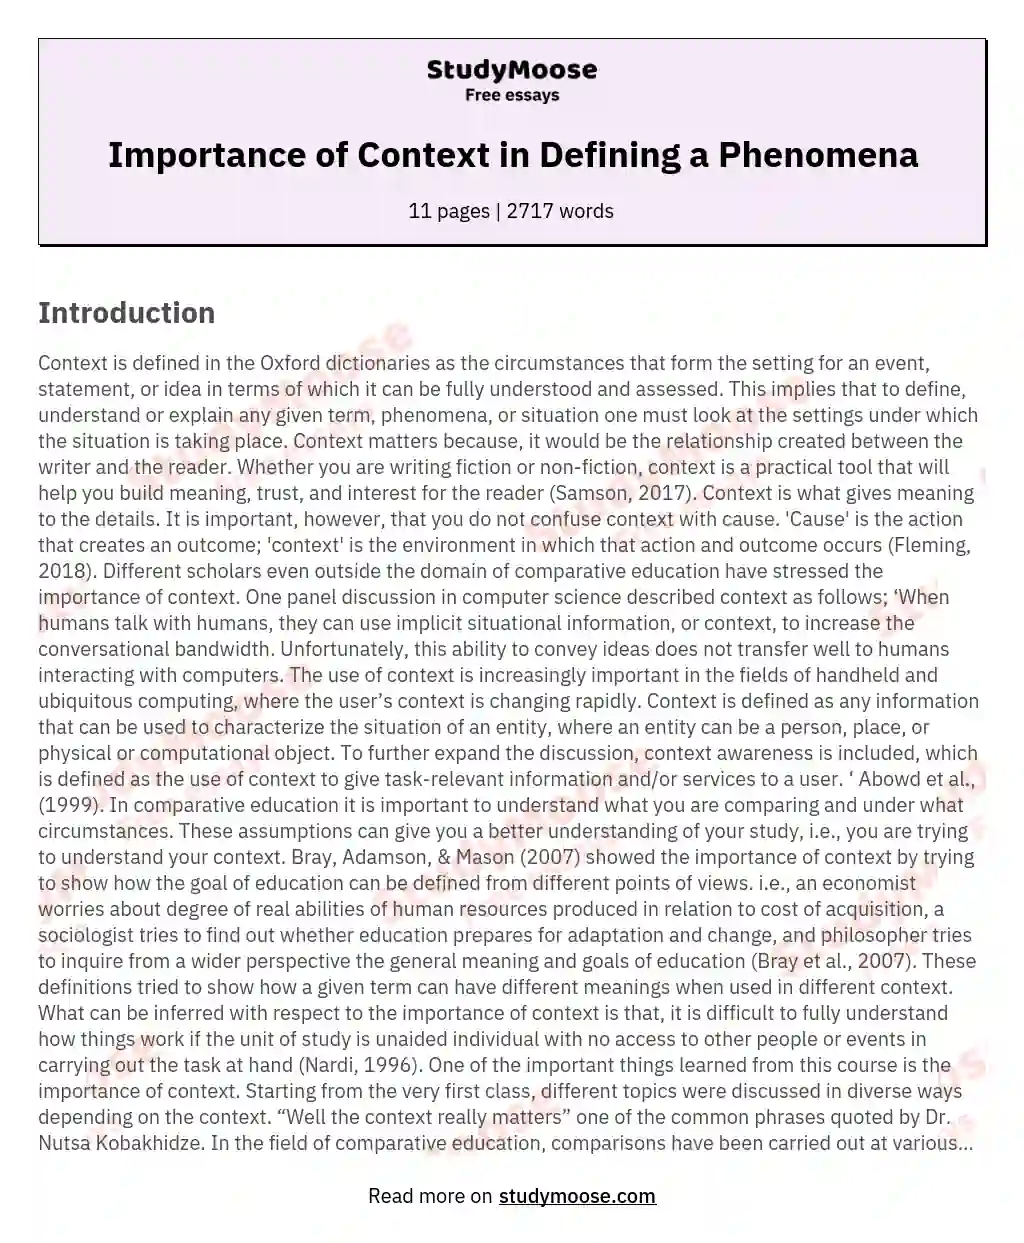 Importance of Context in Defining a Phenomena